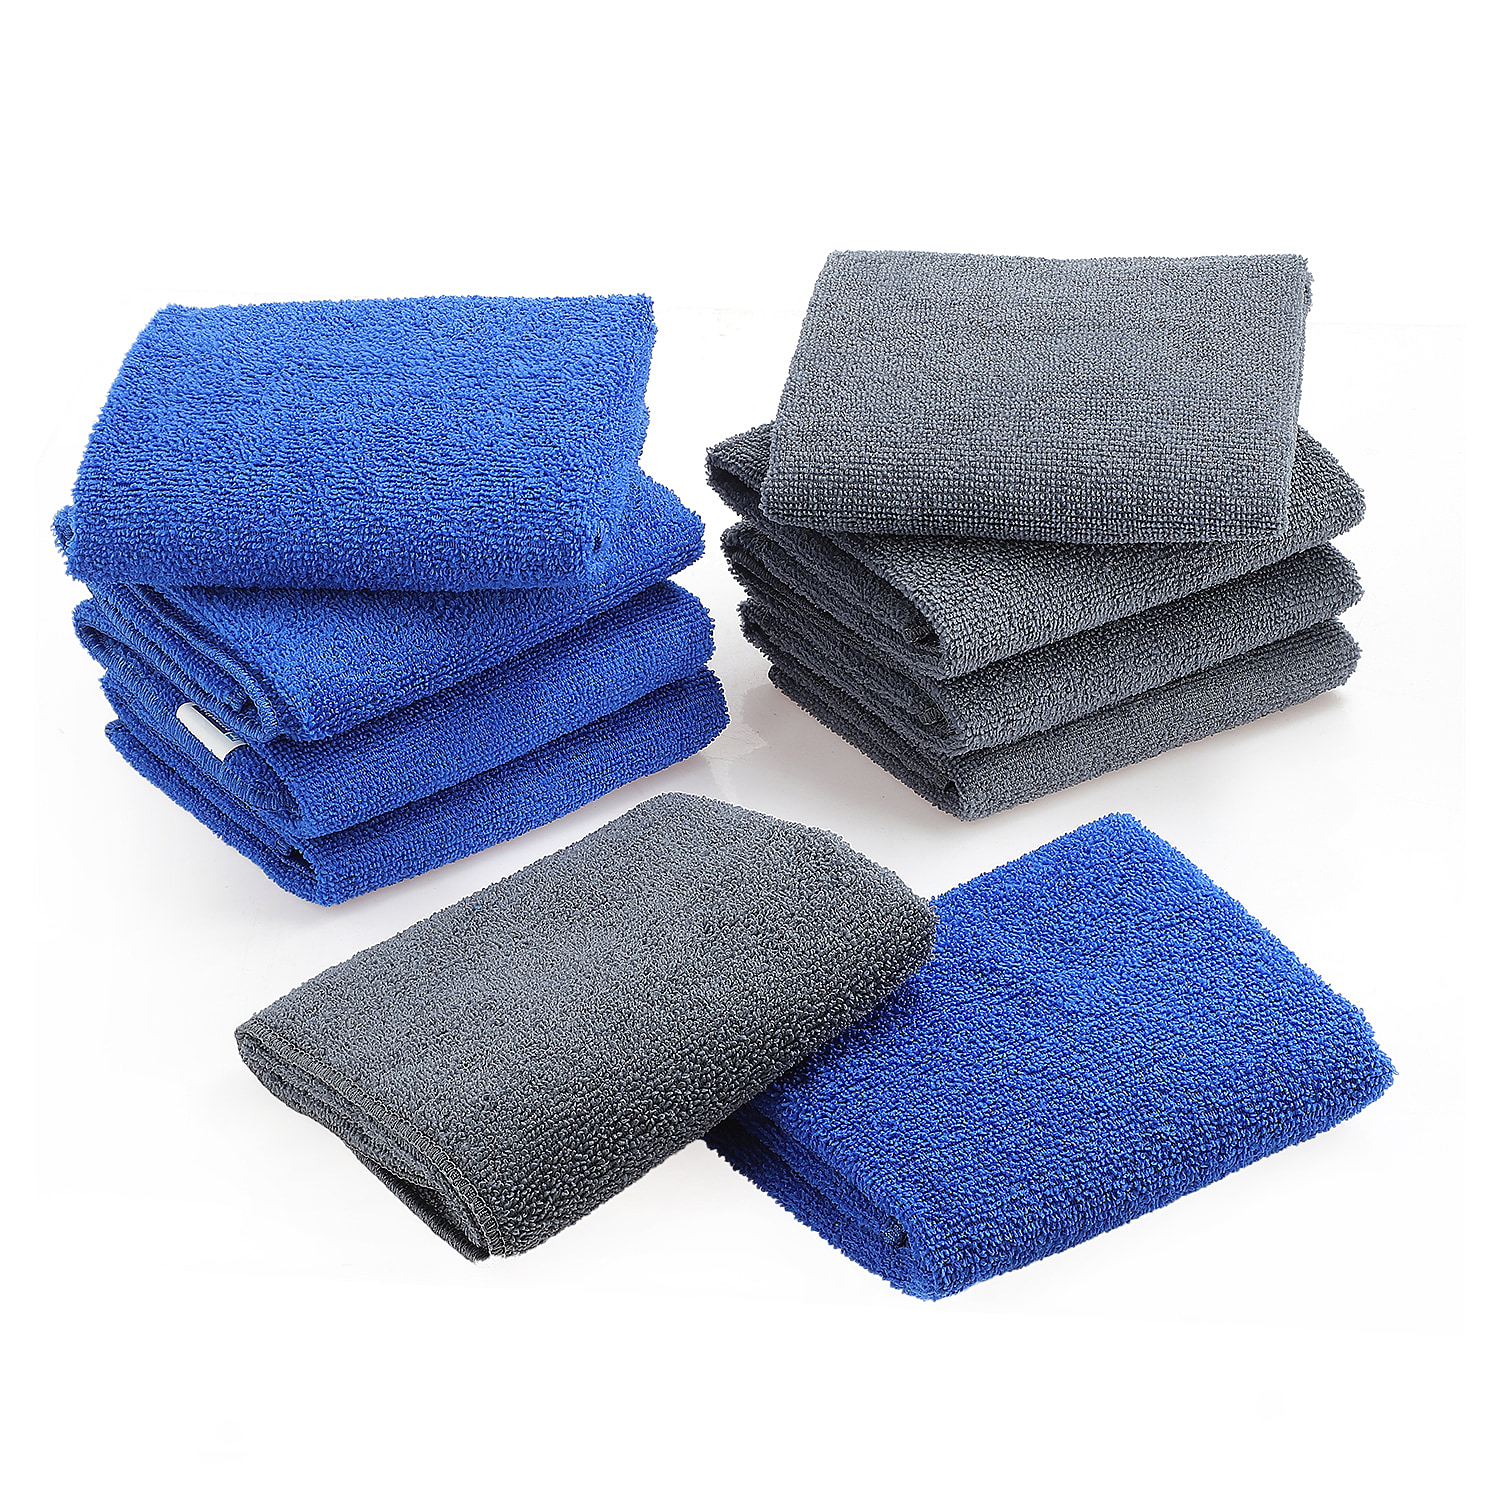 Set of 10 Micro Terry Dish Cloth - Blue and Grey